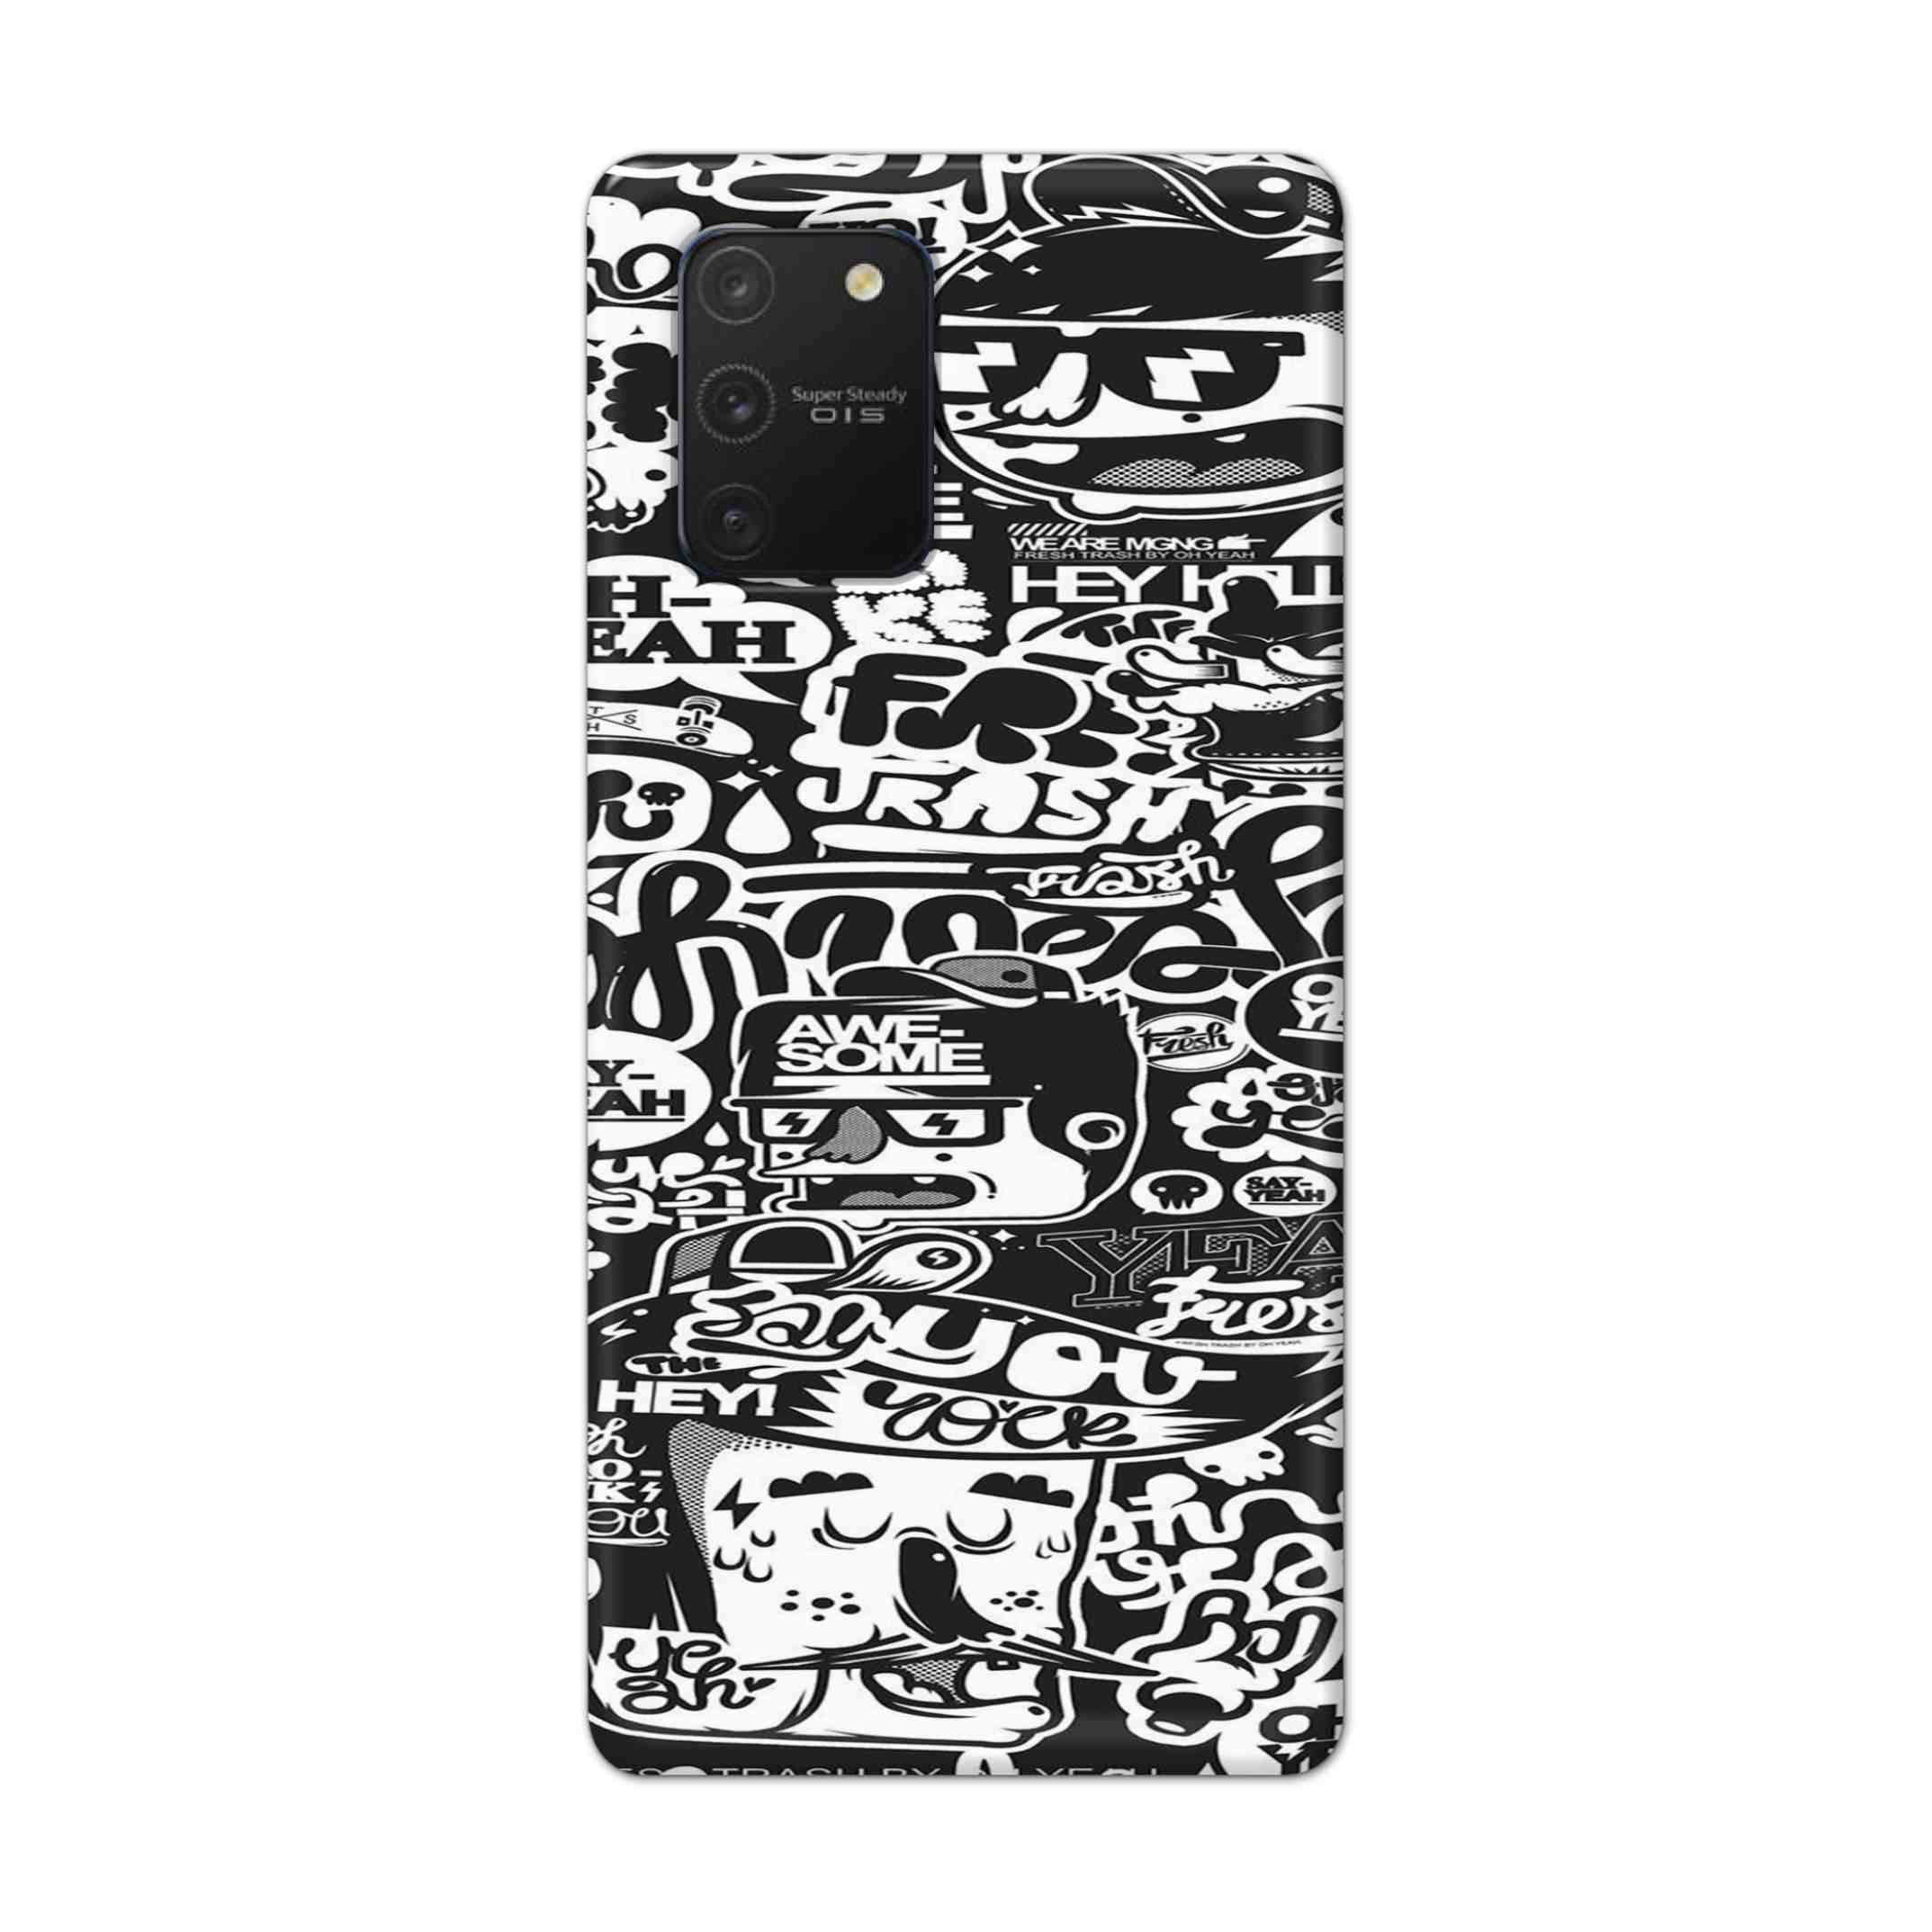 Buy Awesome Hard Back Mobile Phone Case Cover For Samsung Galaxy S10 Lite Online